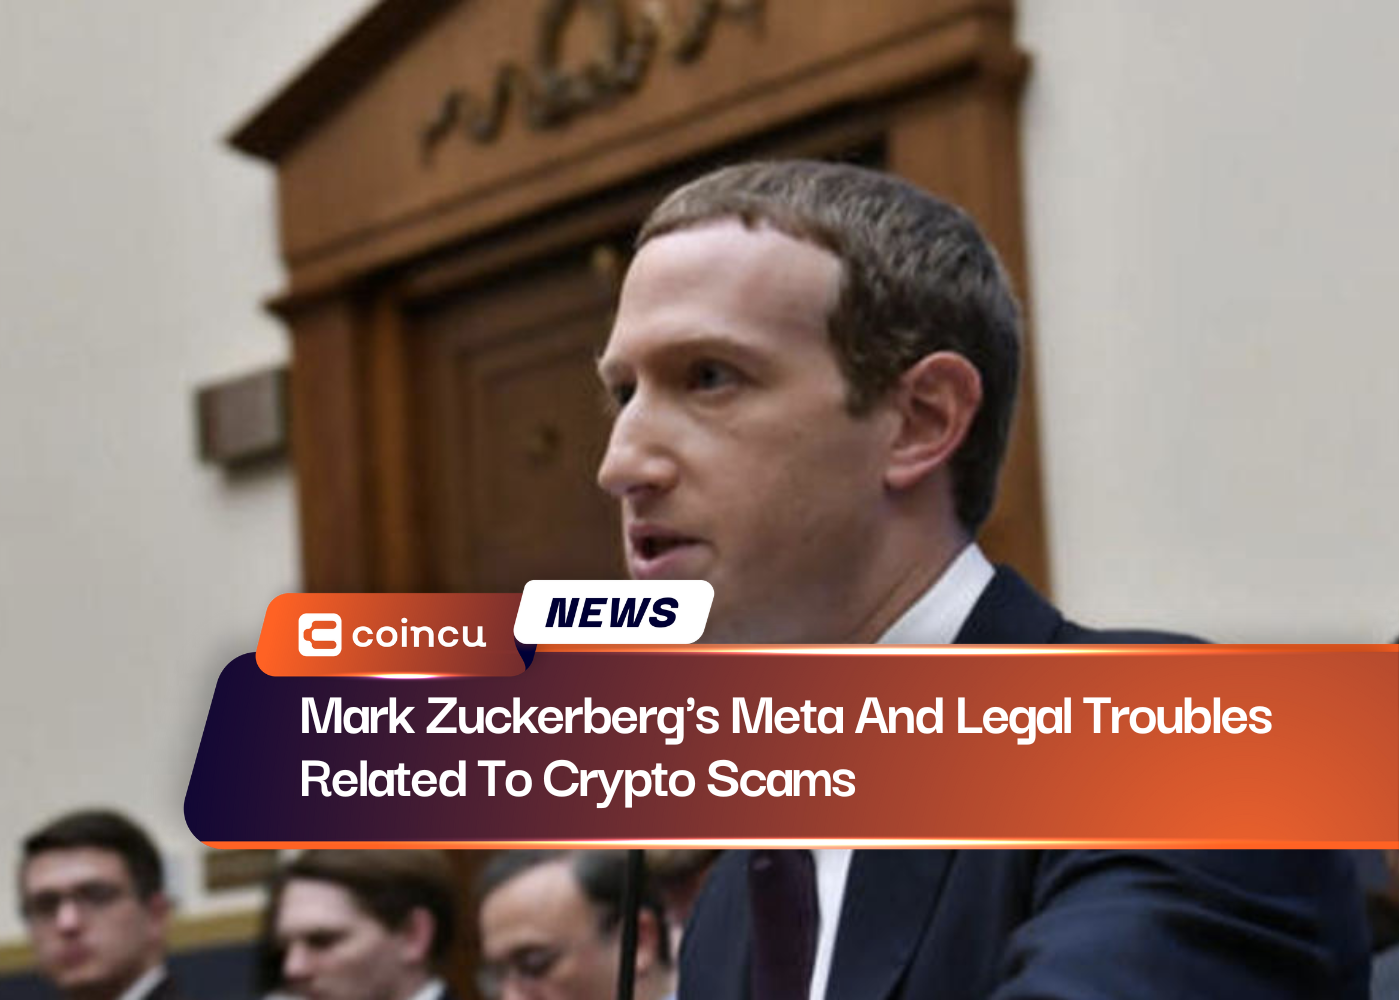 Mark Zuckerberg's Meta And Legal Troubles Related To Crypto Scams